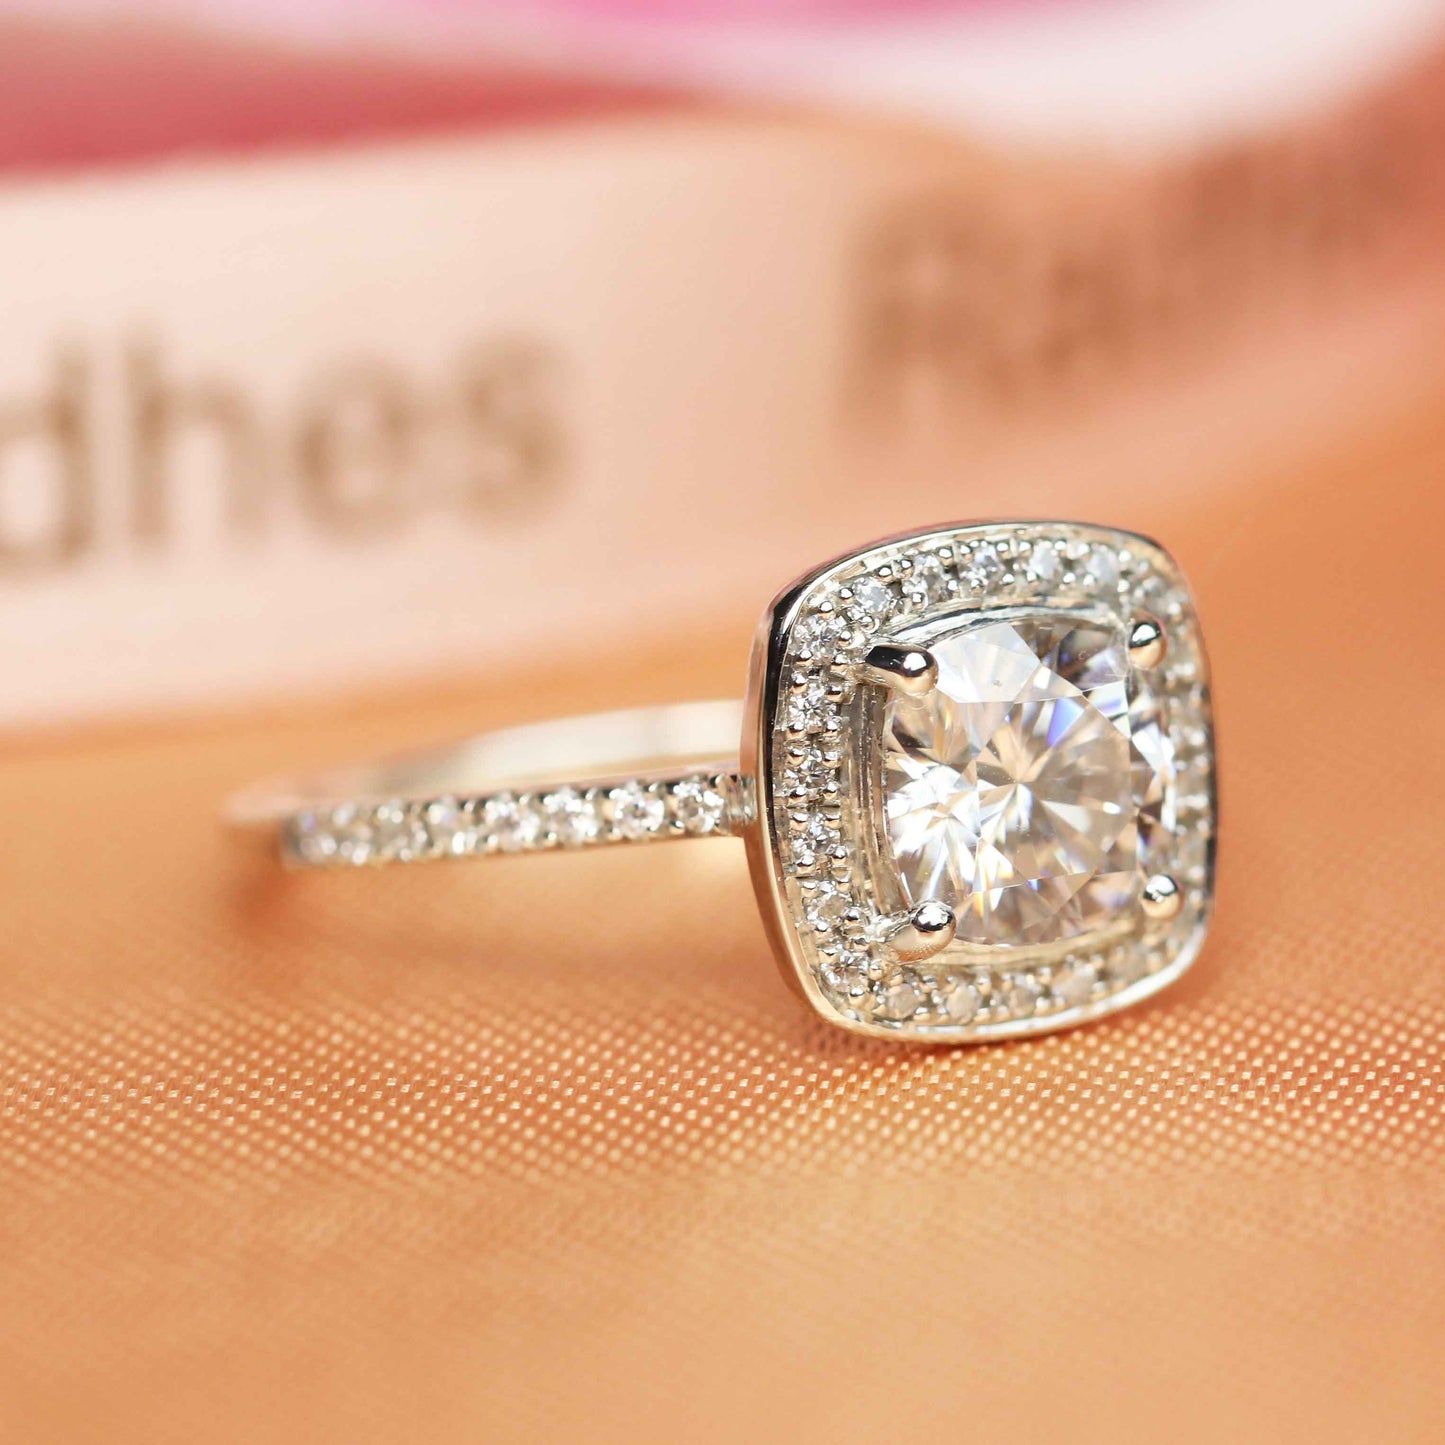 Unique 1.35 carat cushion cut Moissanite Halo Engagement Ring in Gold